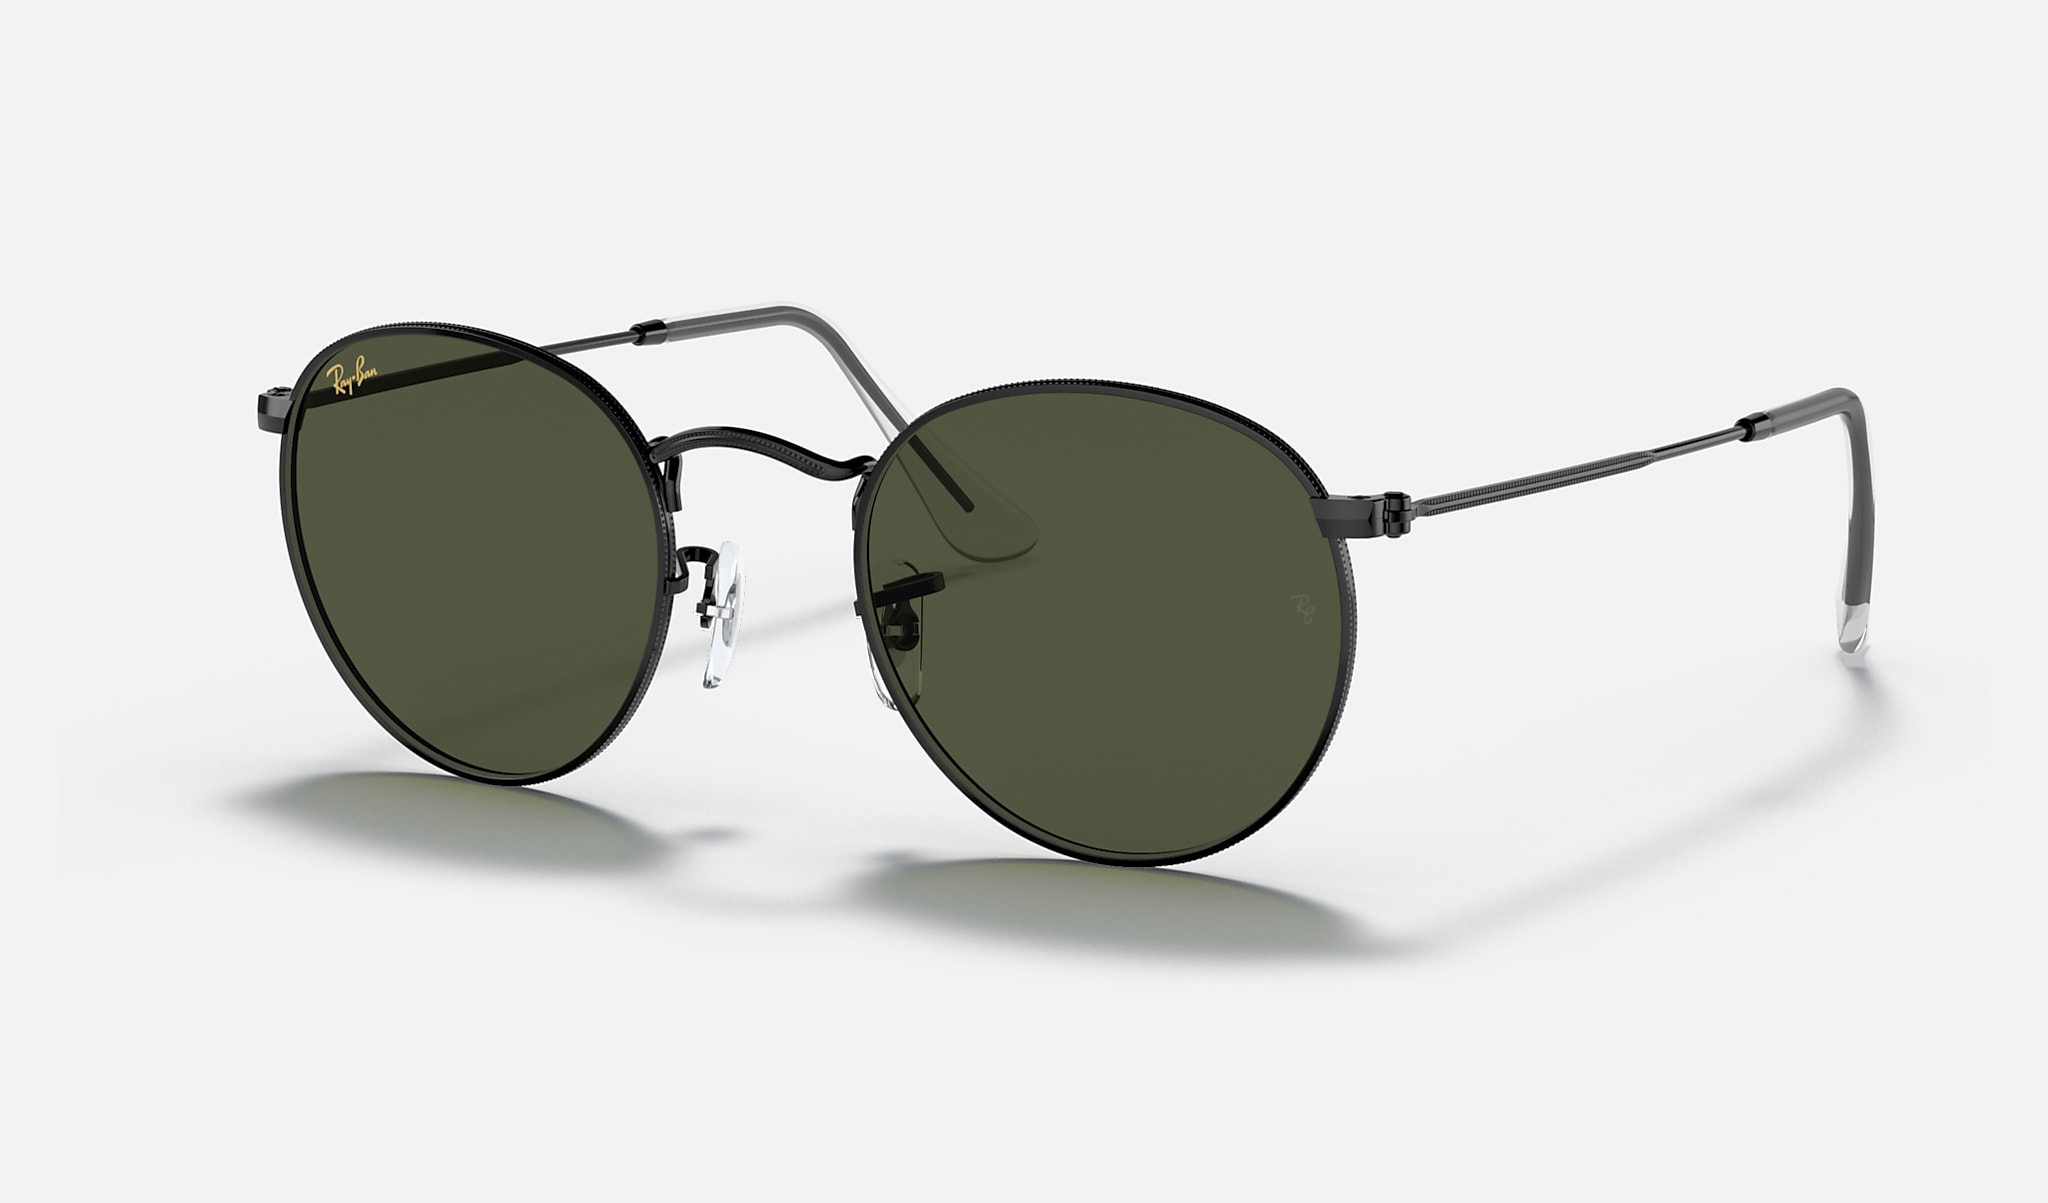 Ray-Ban 0RB3447 ROUND METAL LEGEND GOLD Polished Black SUN